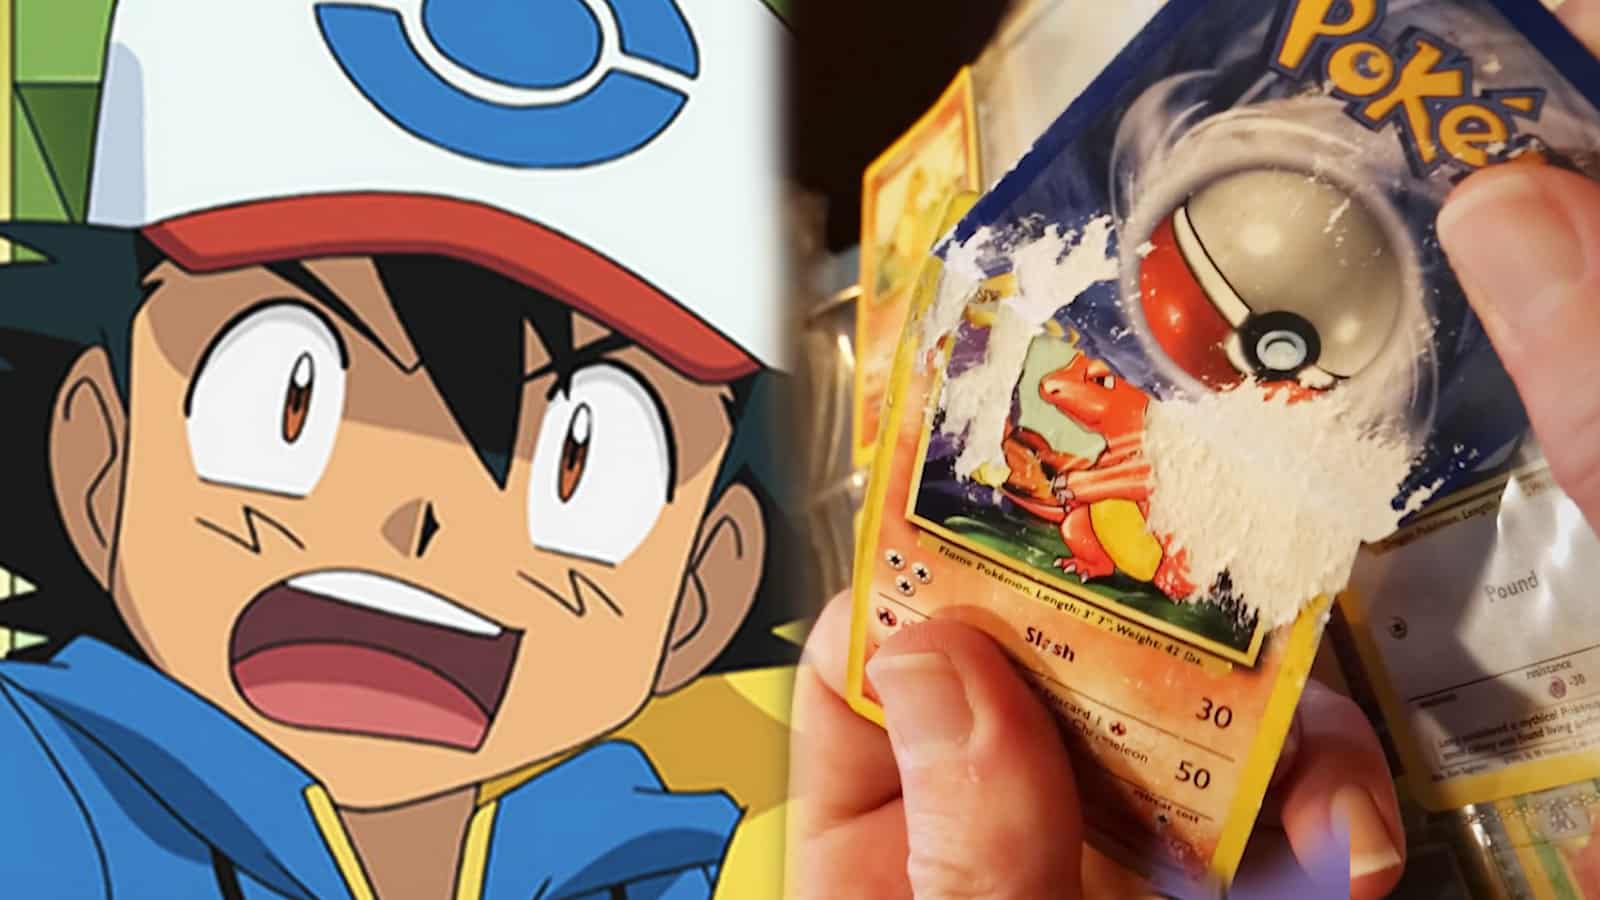 r shows how you're storing your valuable Pokemon cards